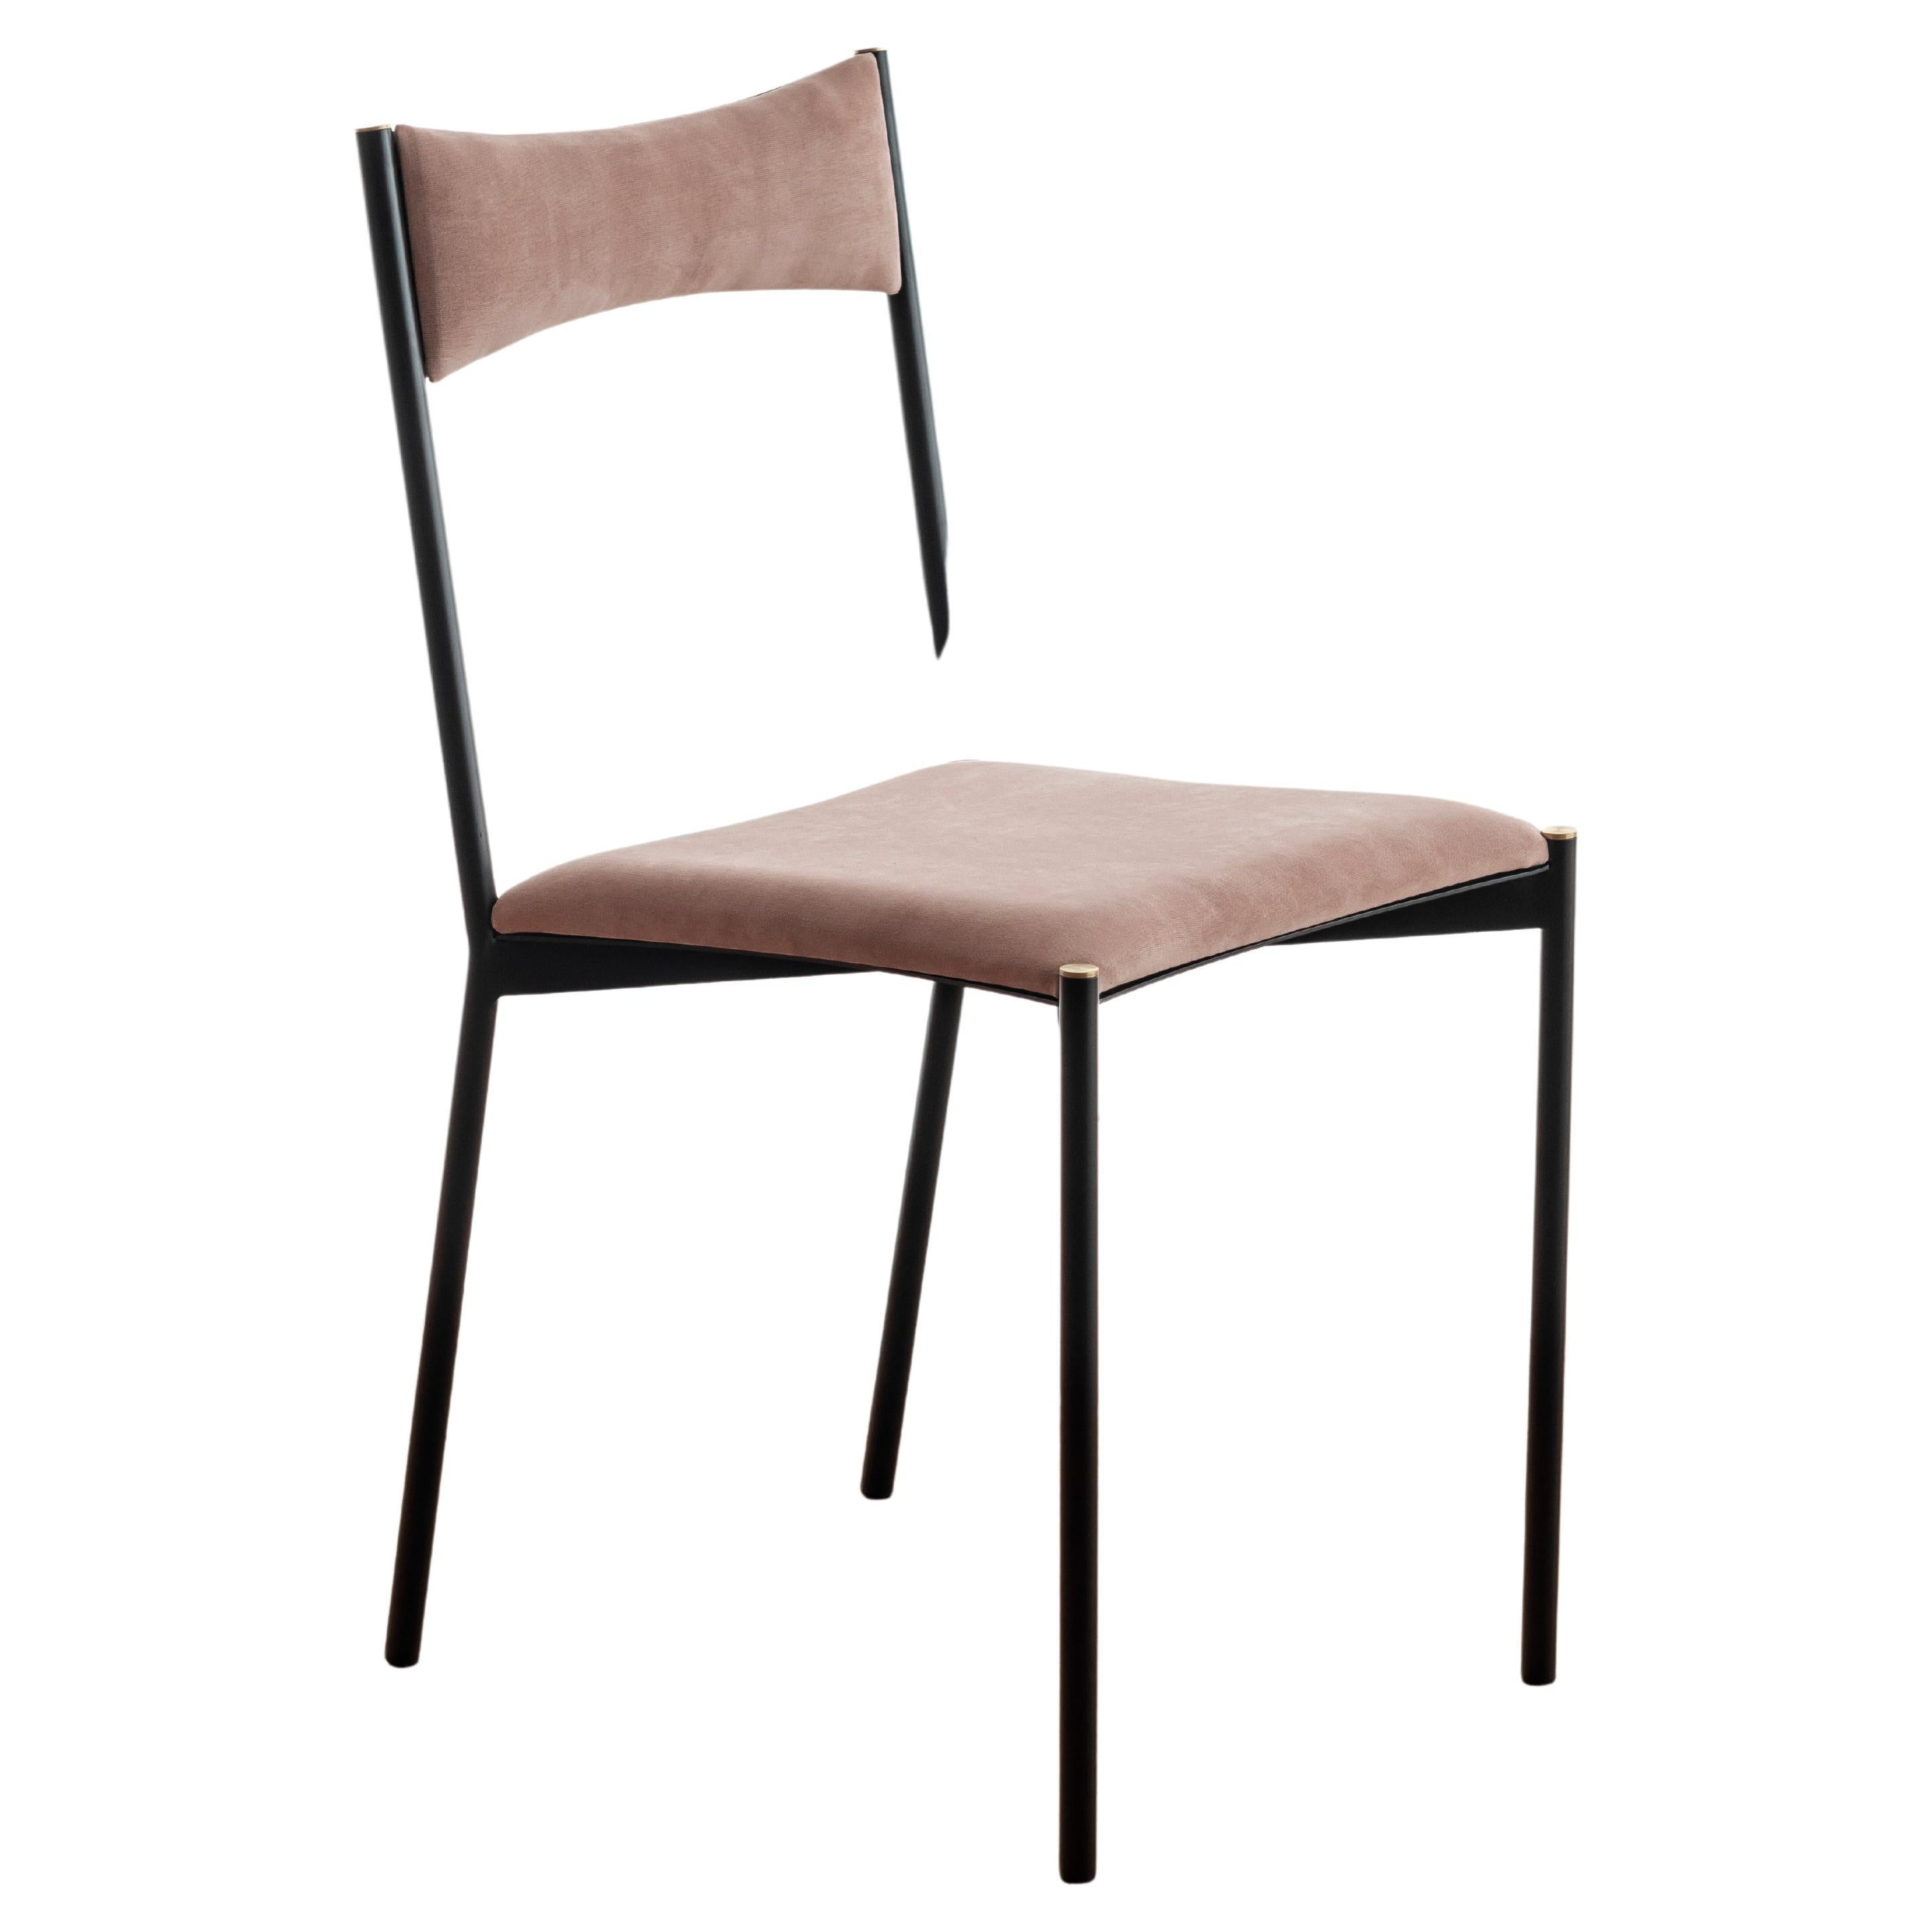 Tensa chair, Pink by Ries
Dimensions: W40 x D49,5 x H82 cm 
Materials: Round steel tube, laser cut metal sheet, high density foam, velvet upholstery, aluminum/bronze caps
Matte powder coated painting (Finishings)

Also Available: Dark Blue,